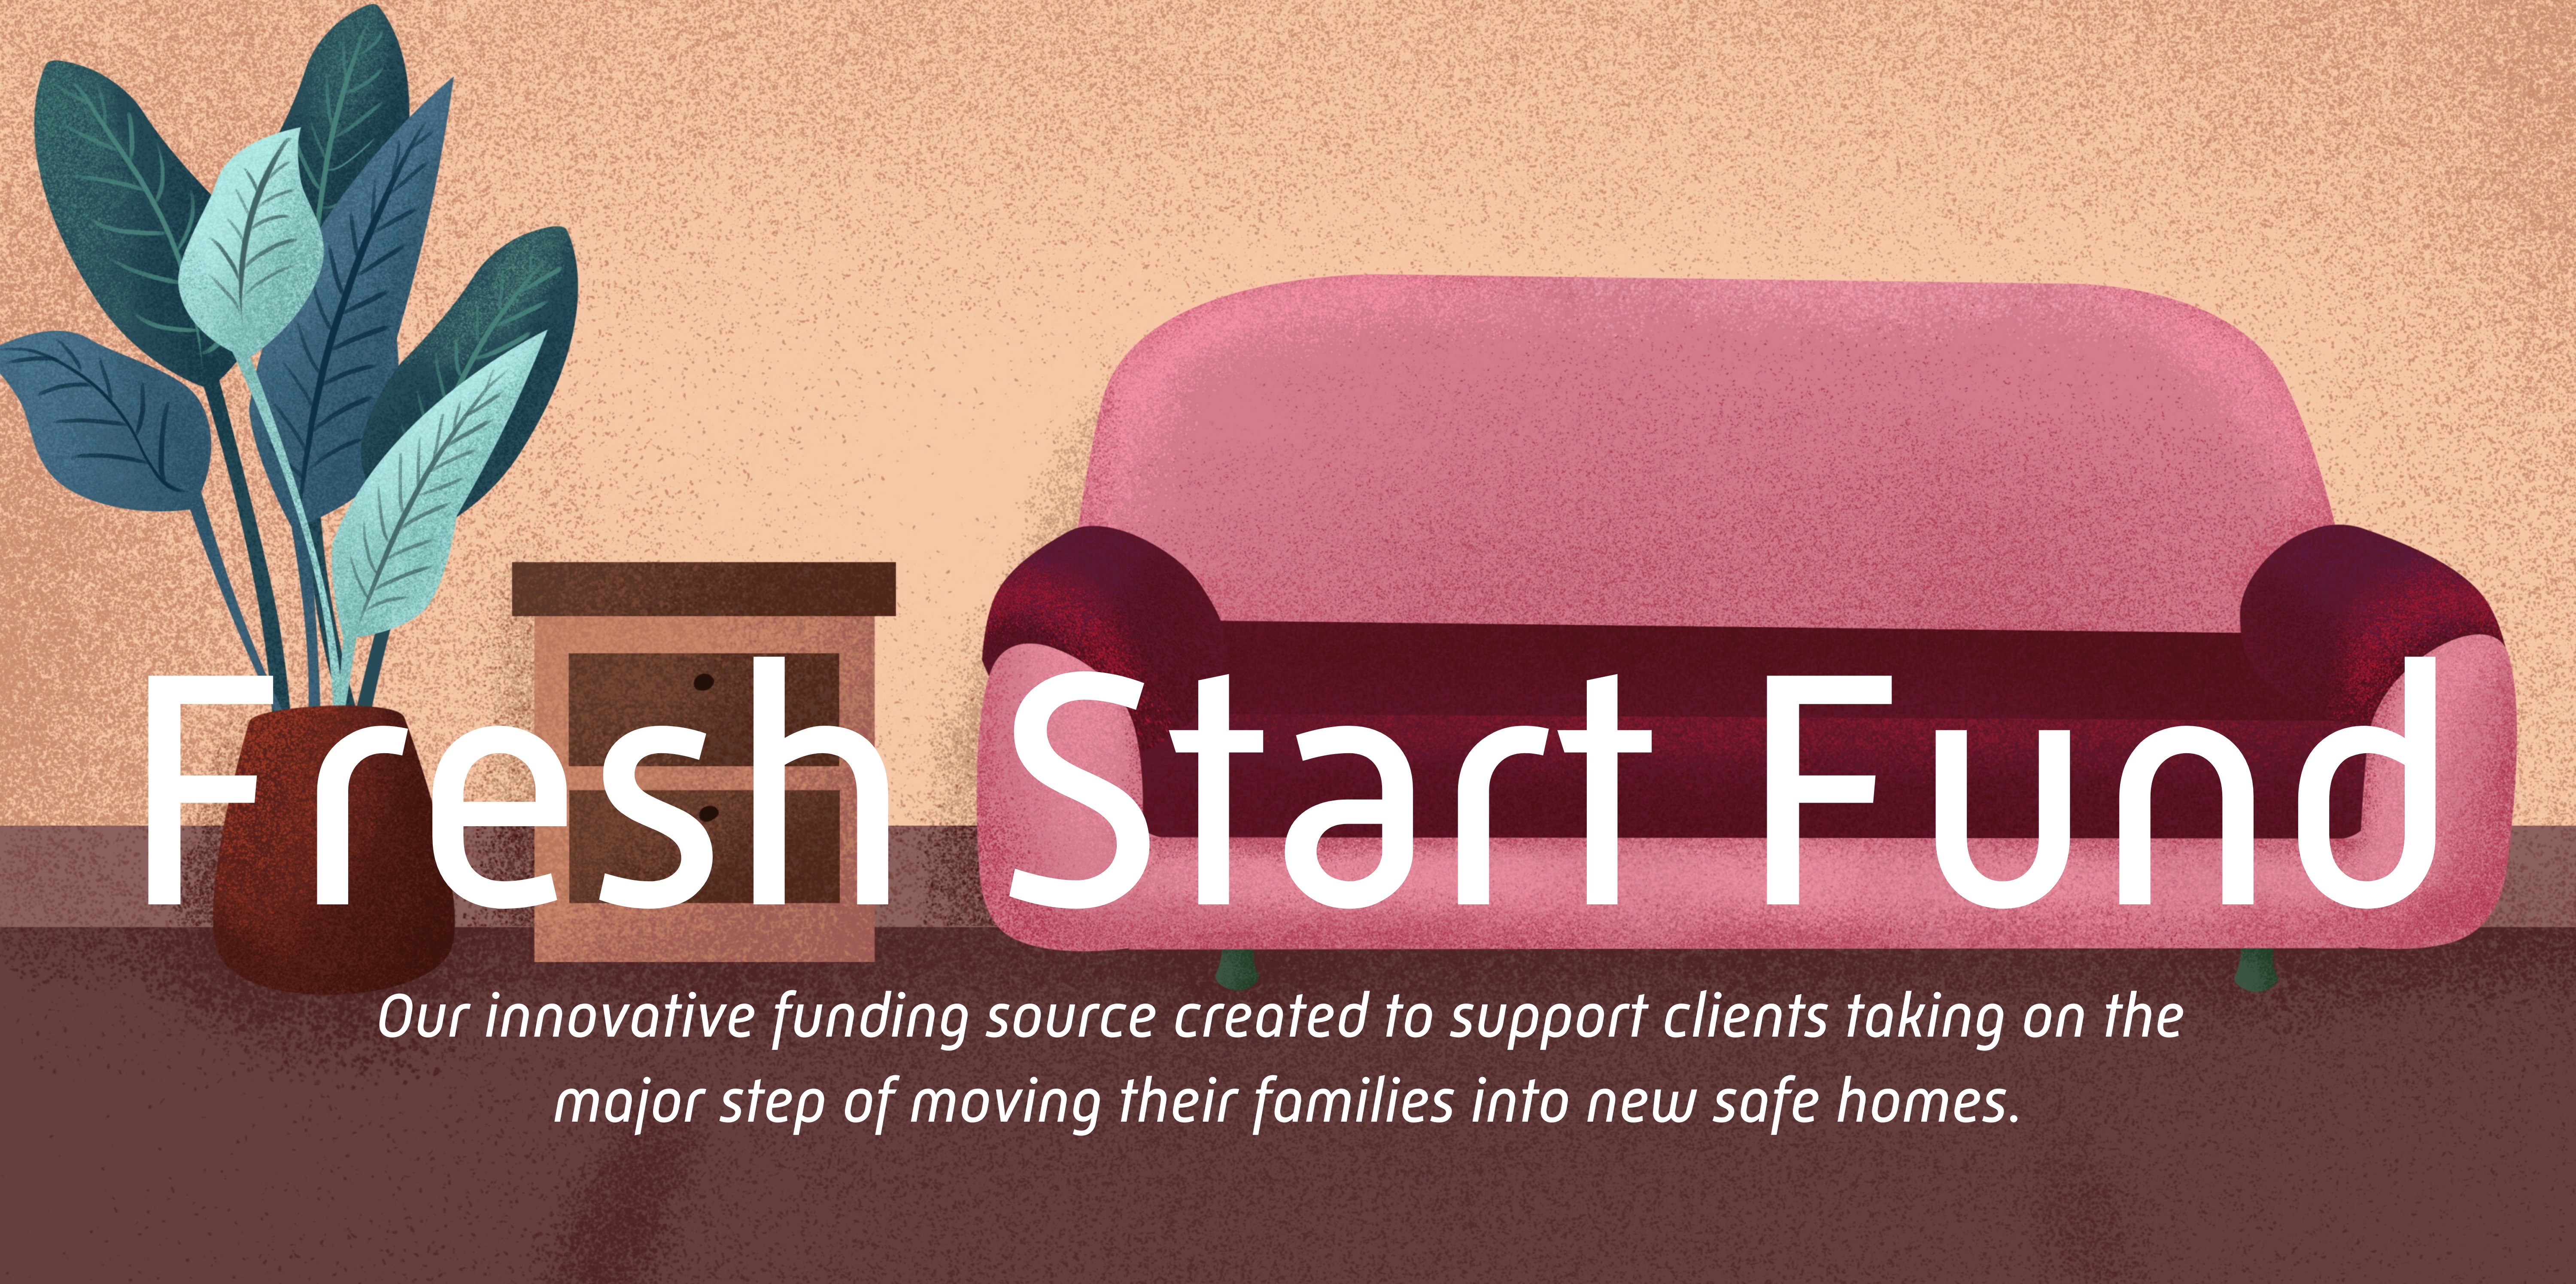 The Fresh Start Fund My Sisters Place 